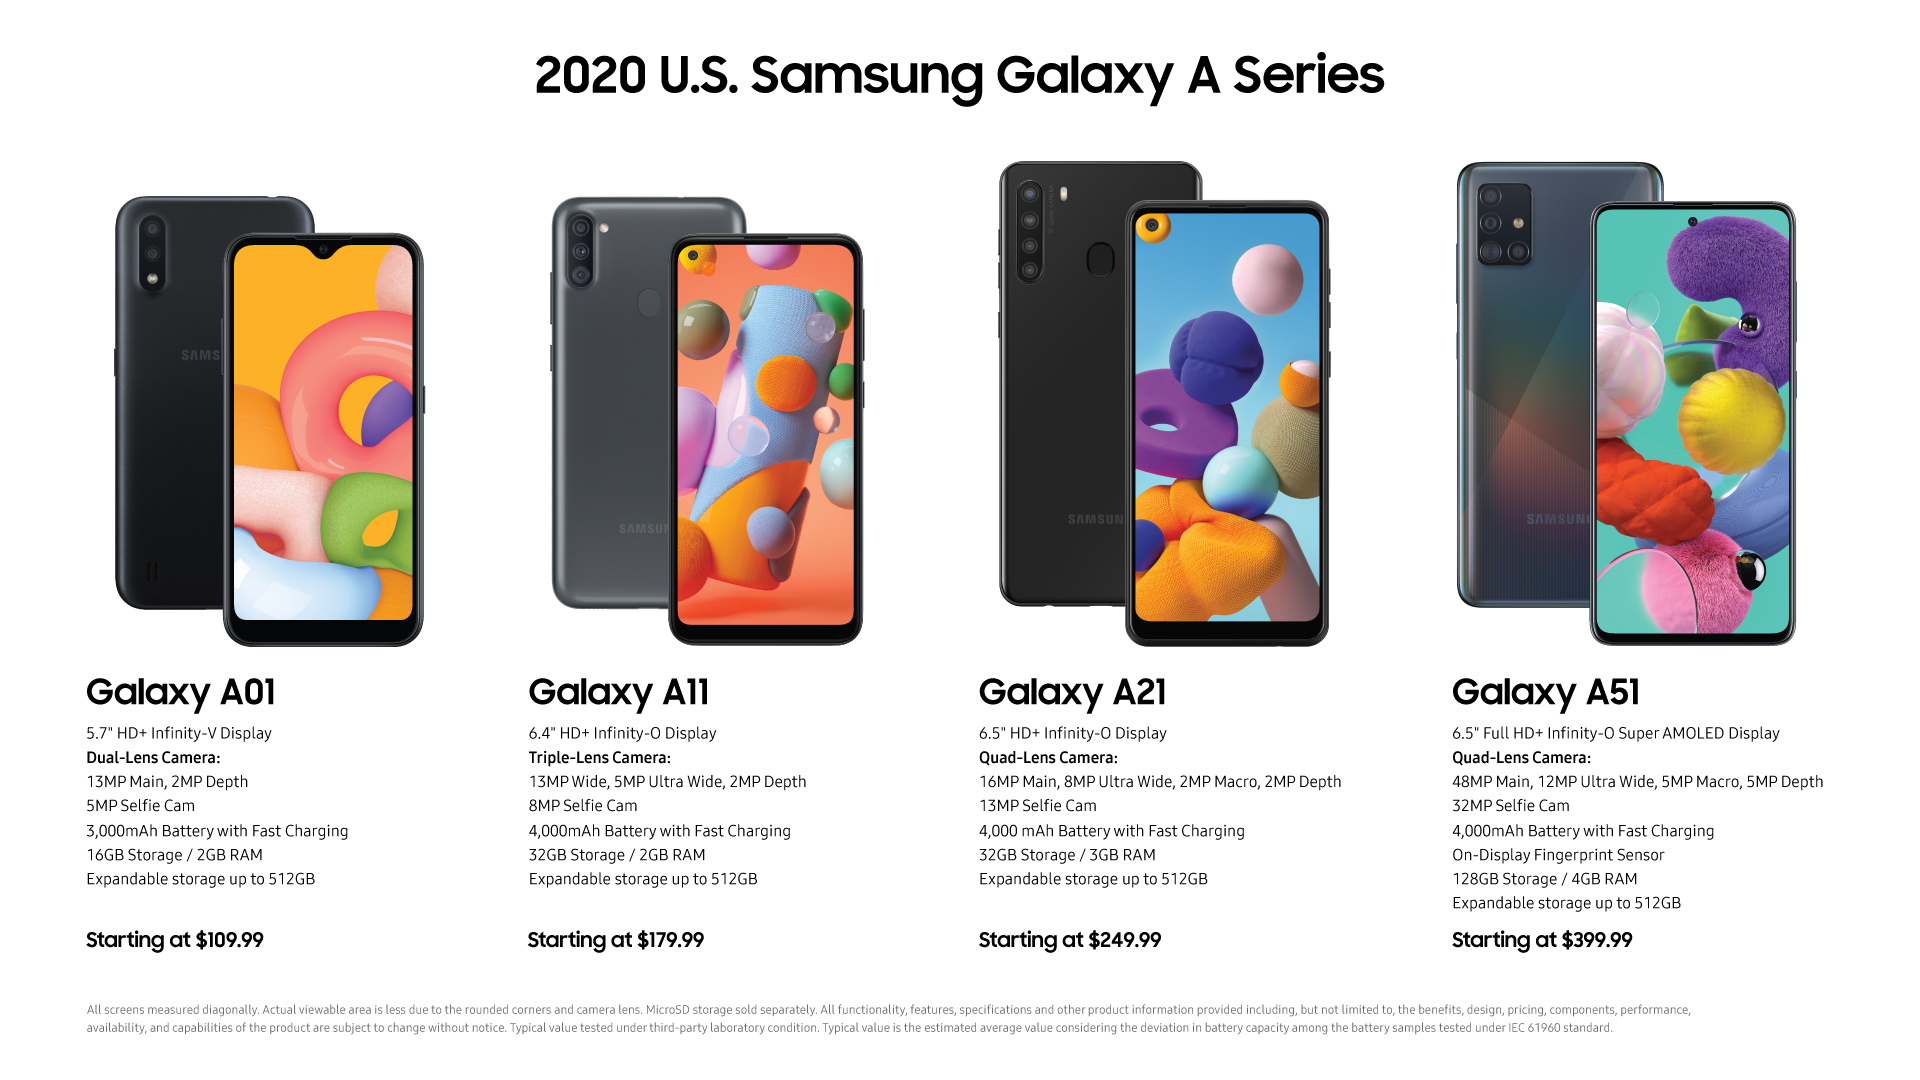 Samsung launches 2020 Galaxy A series, including 5G models, in the US